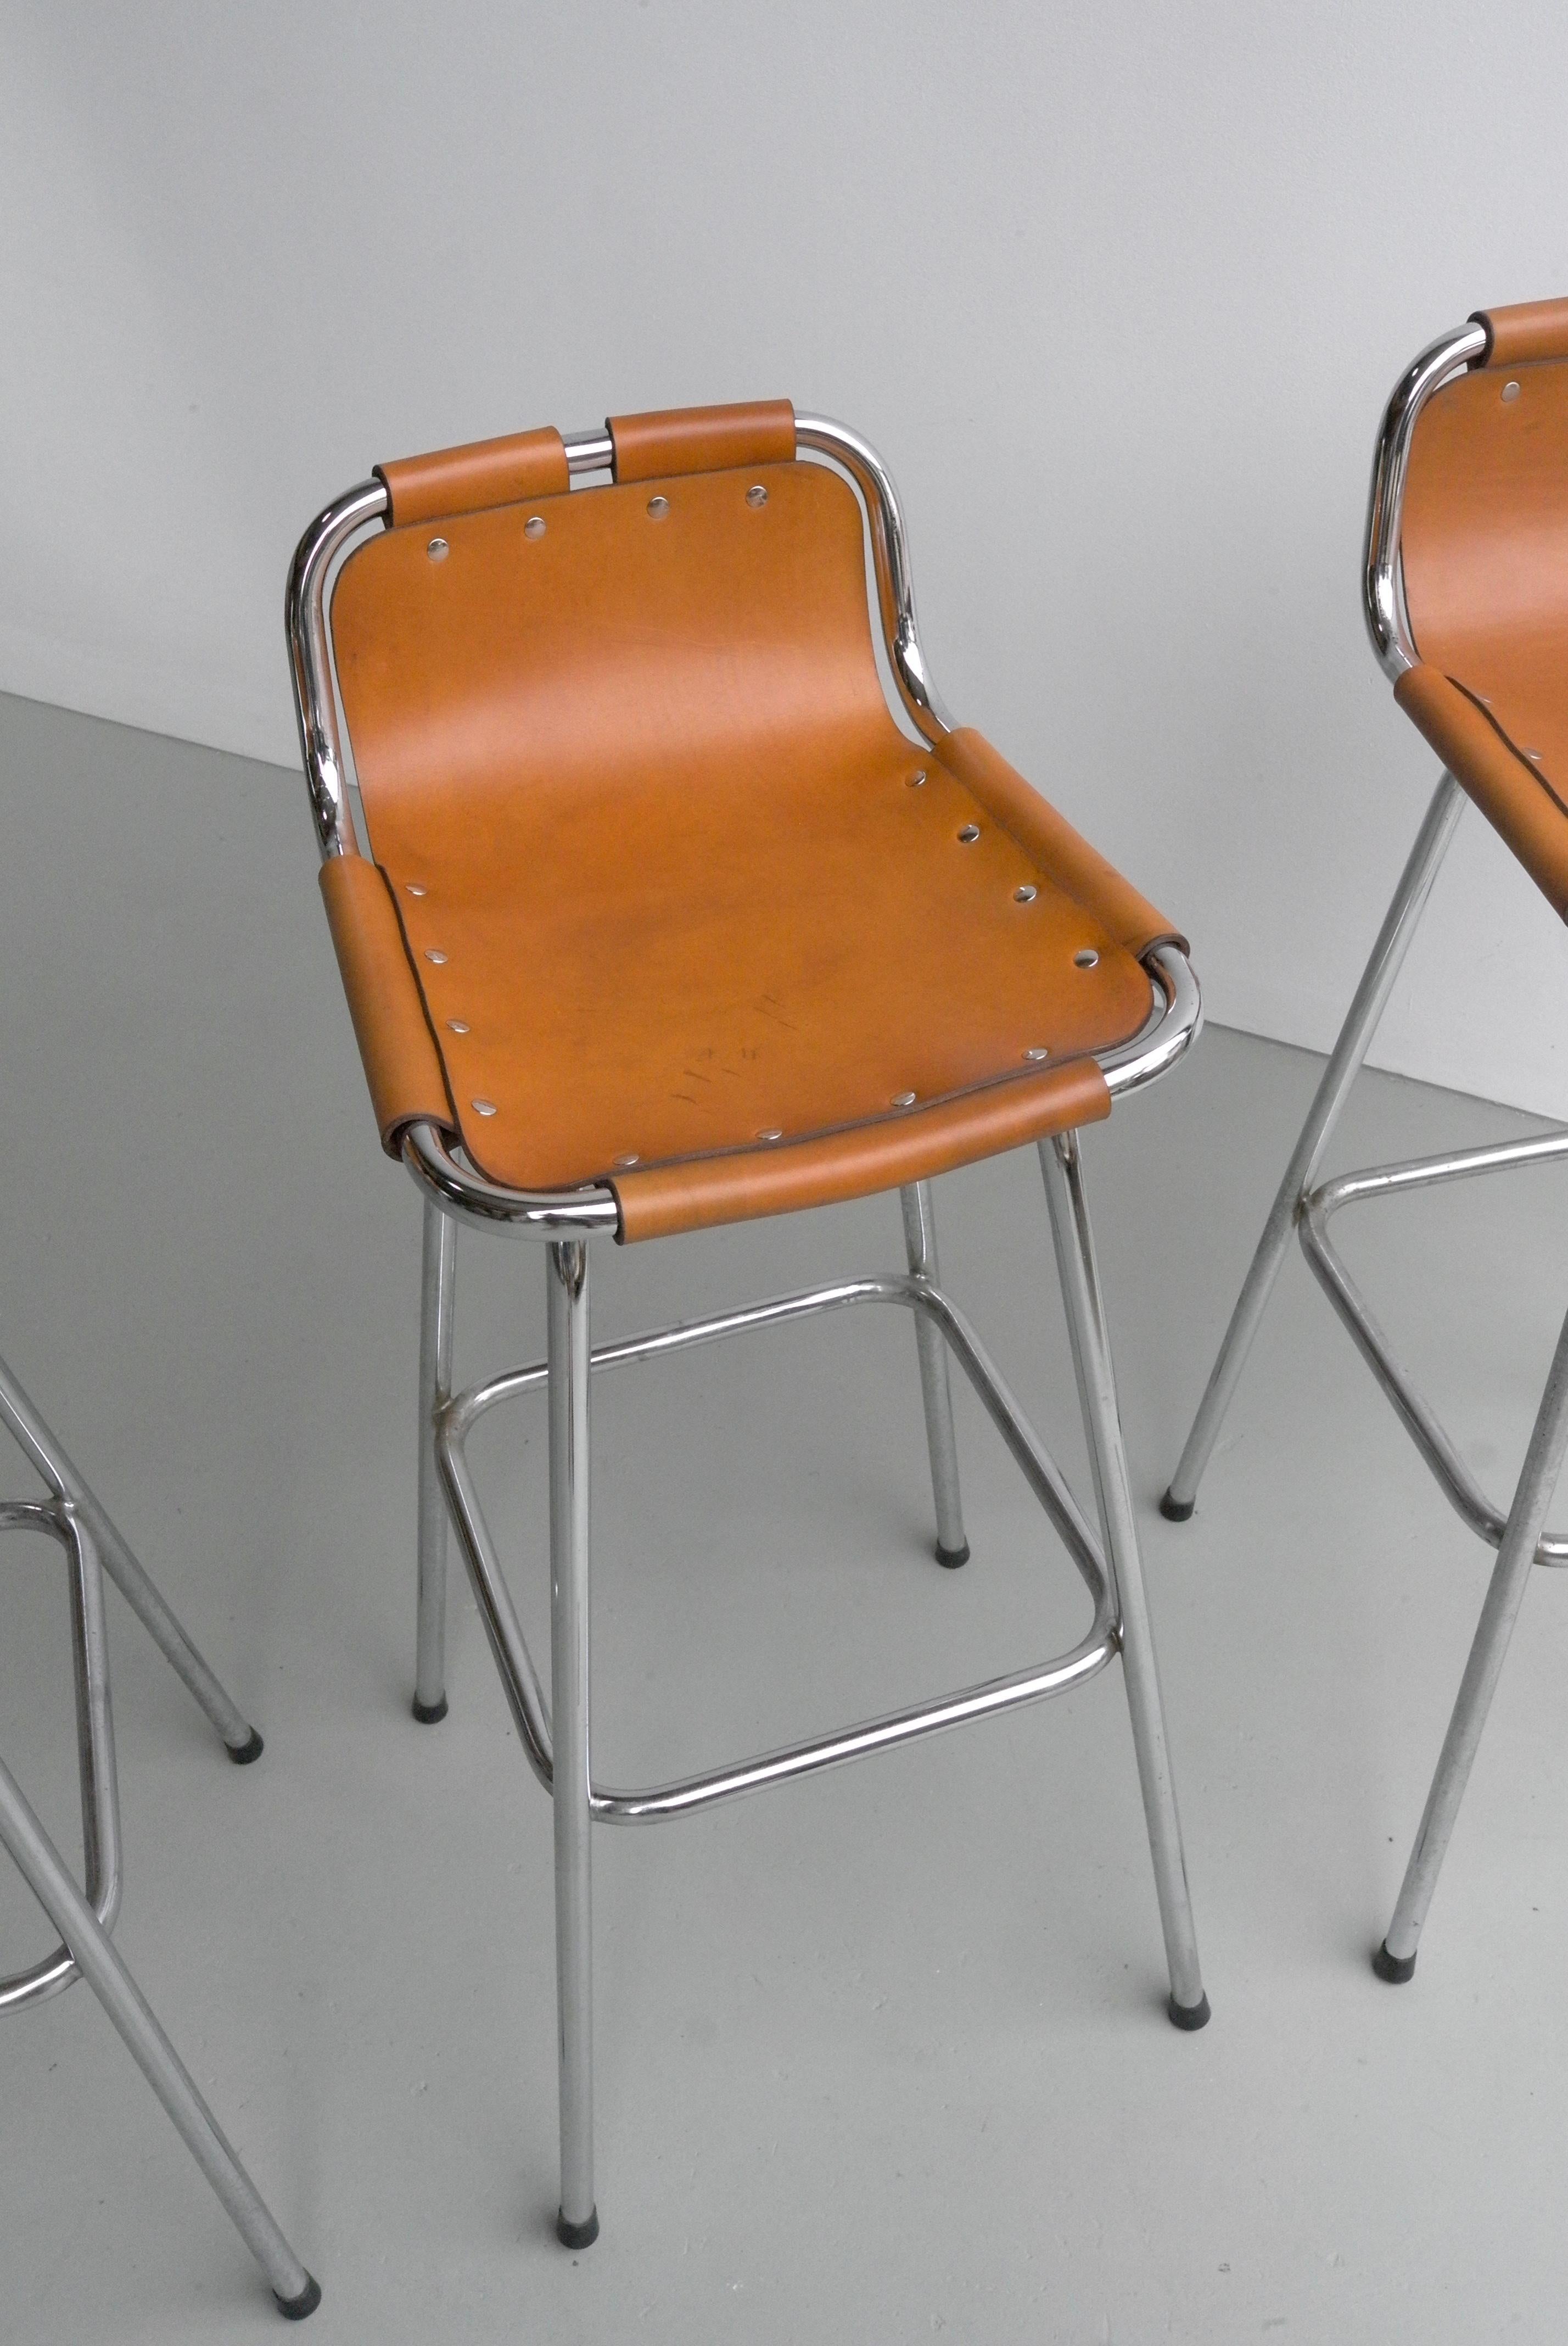 Mid-Century Modern Leather Barstools for Les Arc Ski Resort France, Selected by Charlotte Perriand